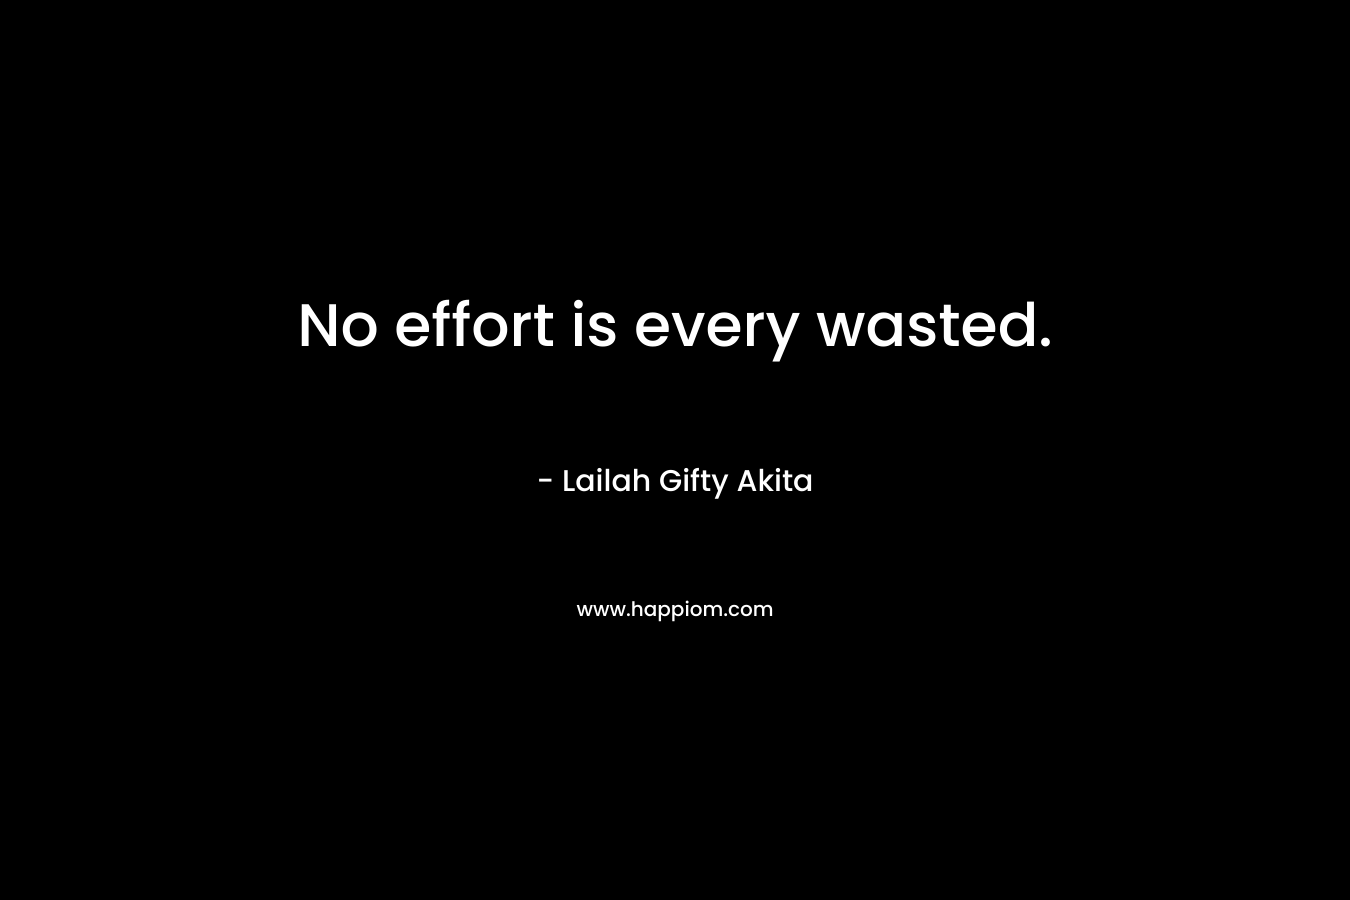 No effort is every wasted.